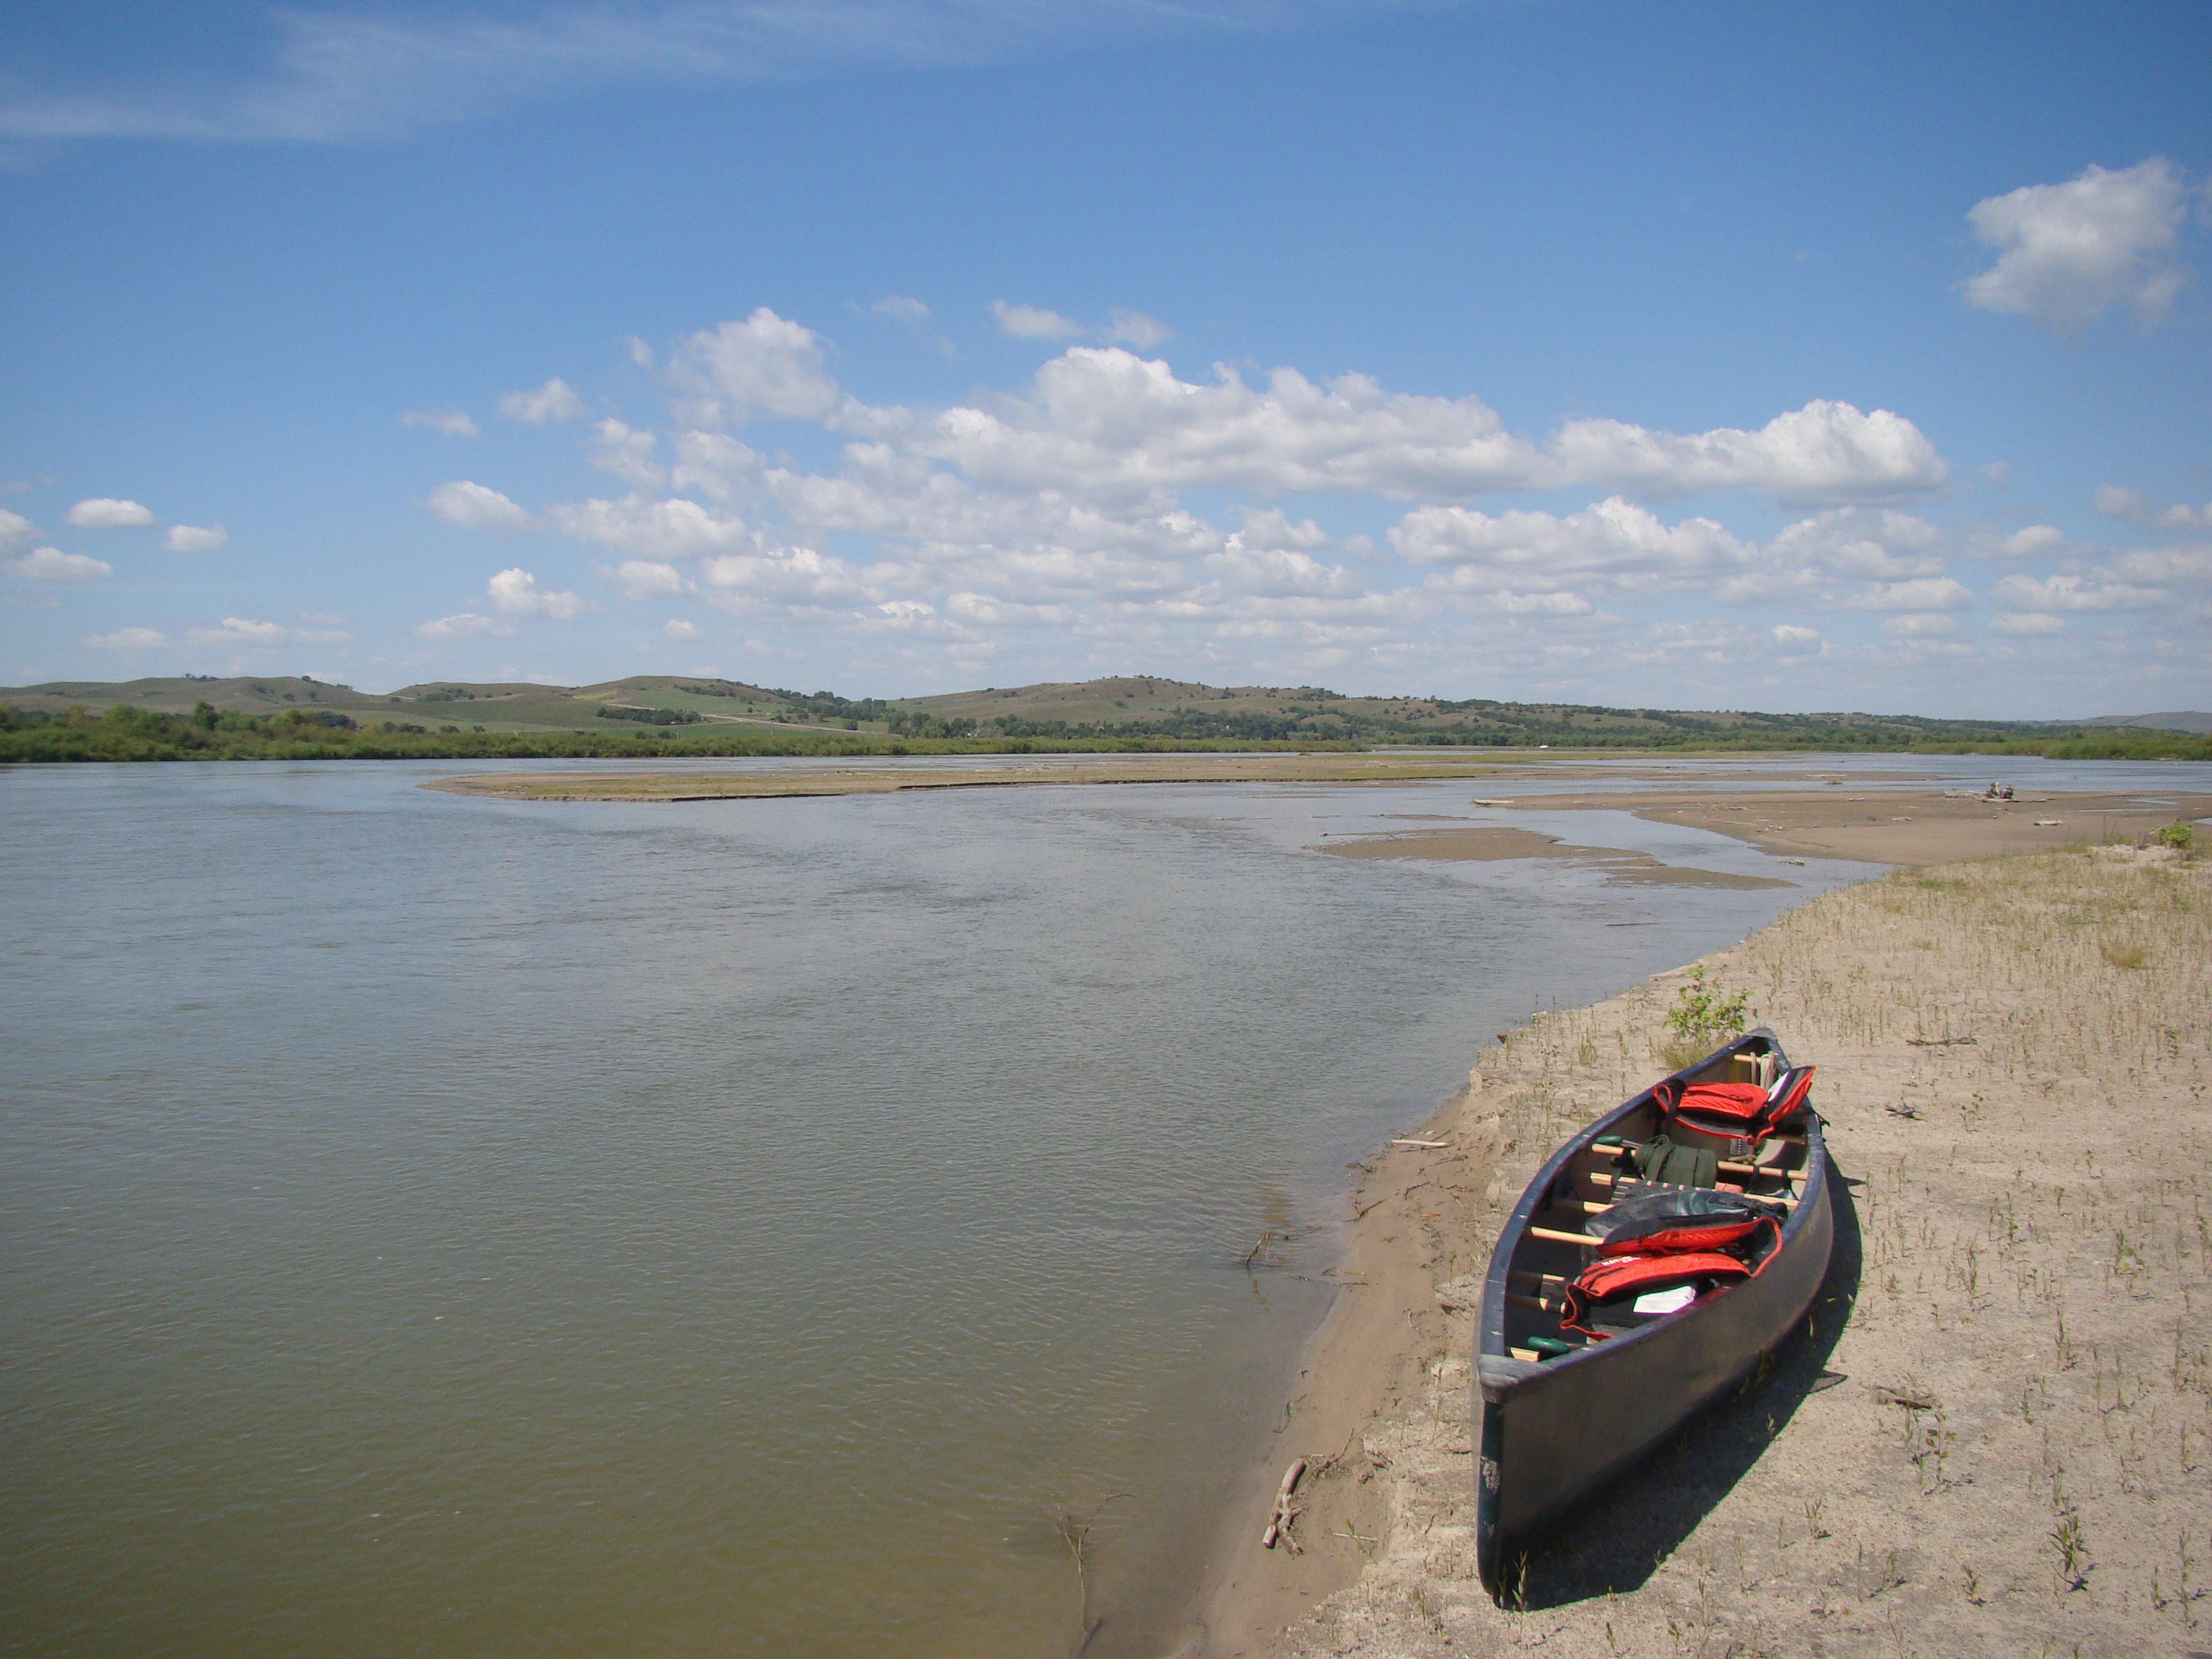 A canoe loaded with gear sits quietly on a sandy river bank with blue sky above.